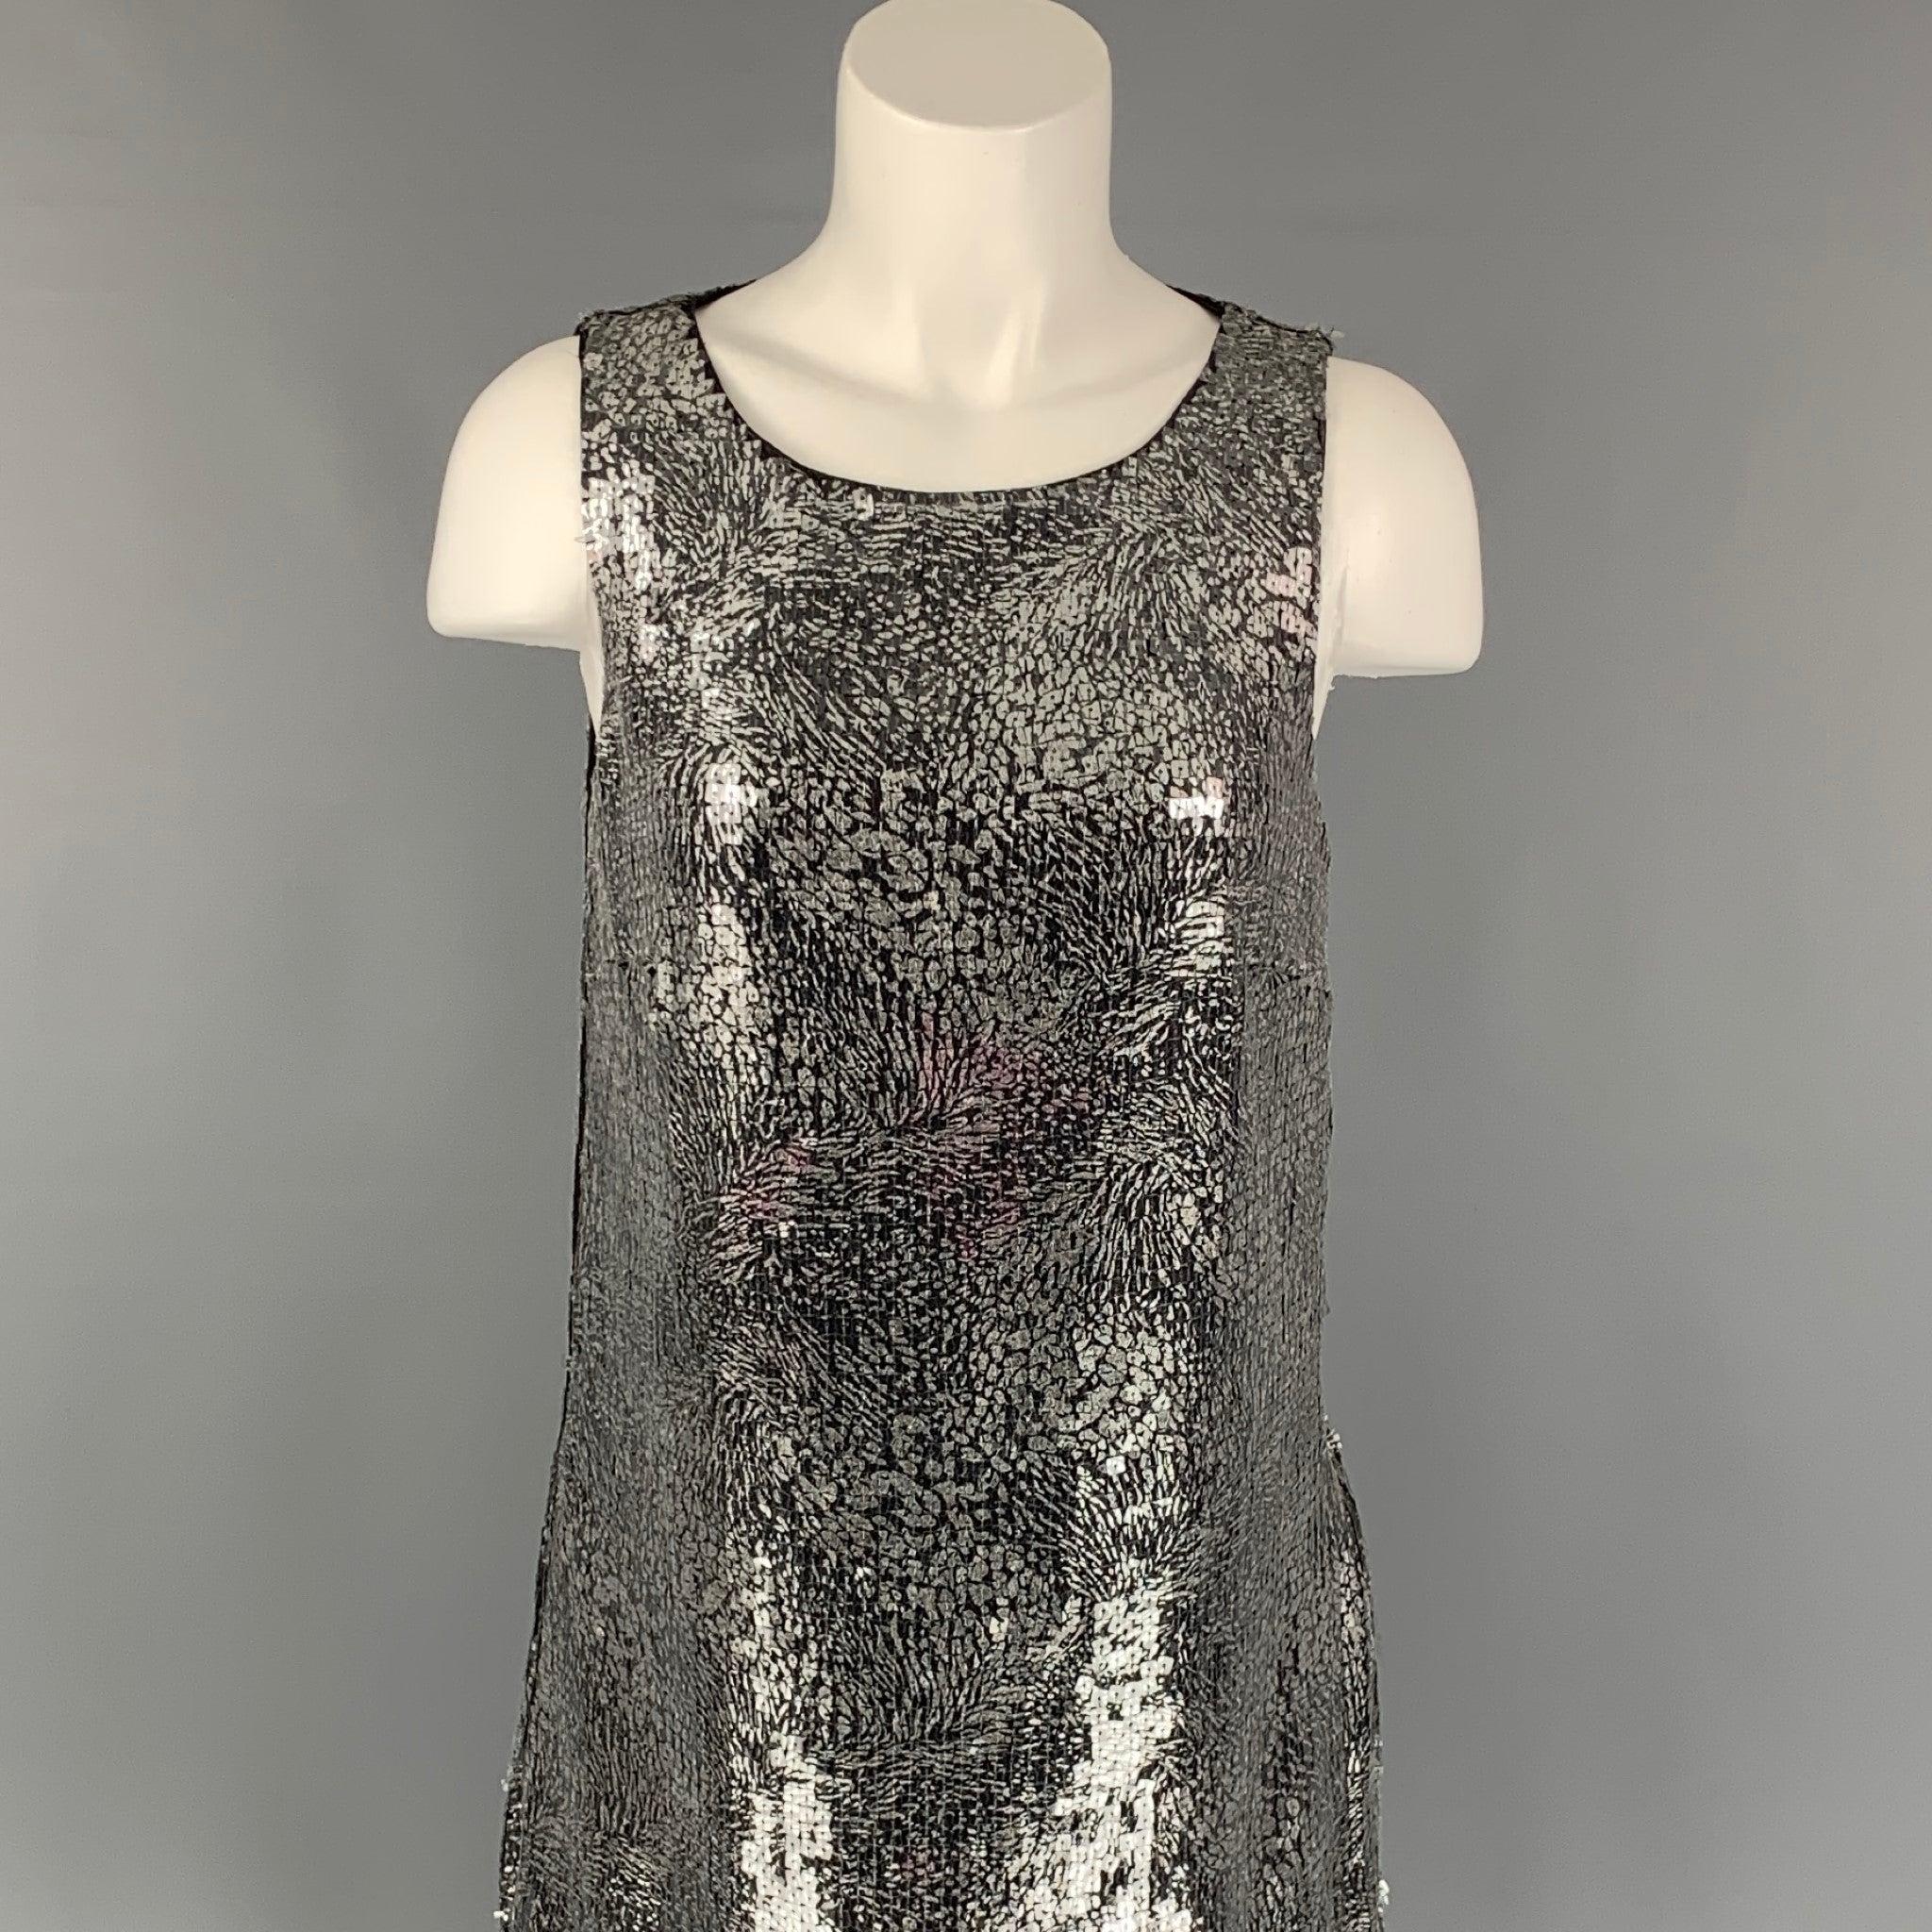 BADGLEY MISCHKA COLLECTION dress comes in a silver & black sequined polyester featuring a shift style, ostrich feather trim, sleeveless, and a side zipper closure.
Very Good Pre-Owned Condition. Fabric tag removed. Light discoloration at front. 